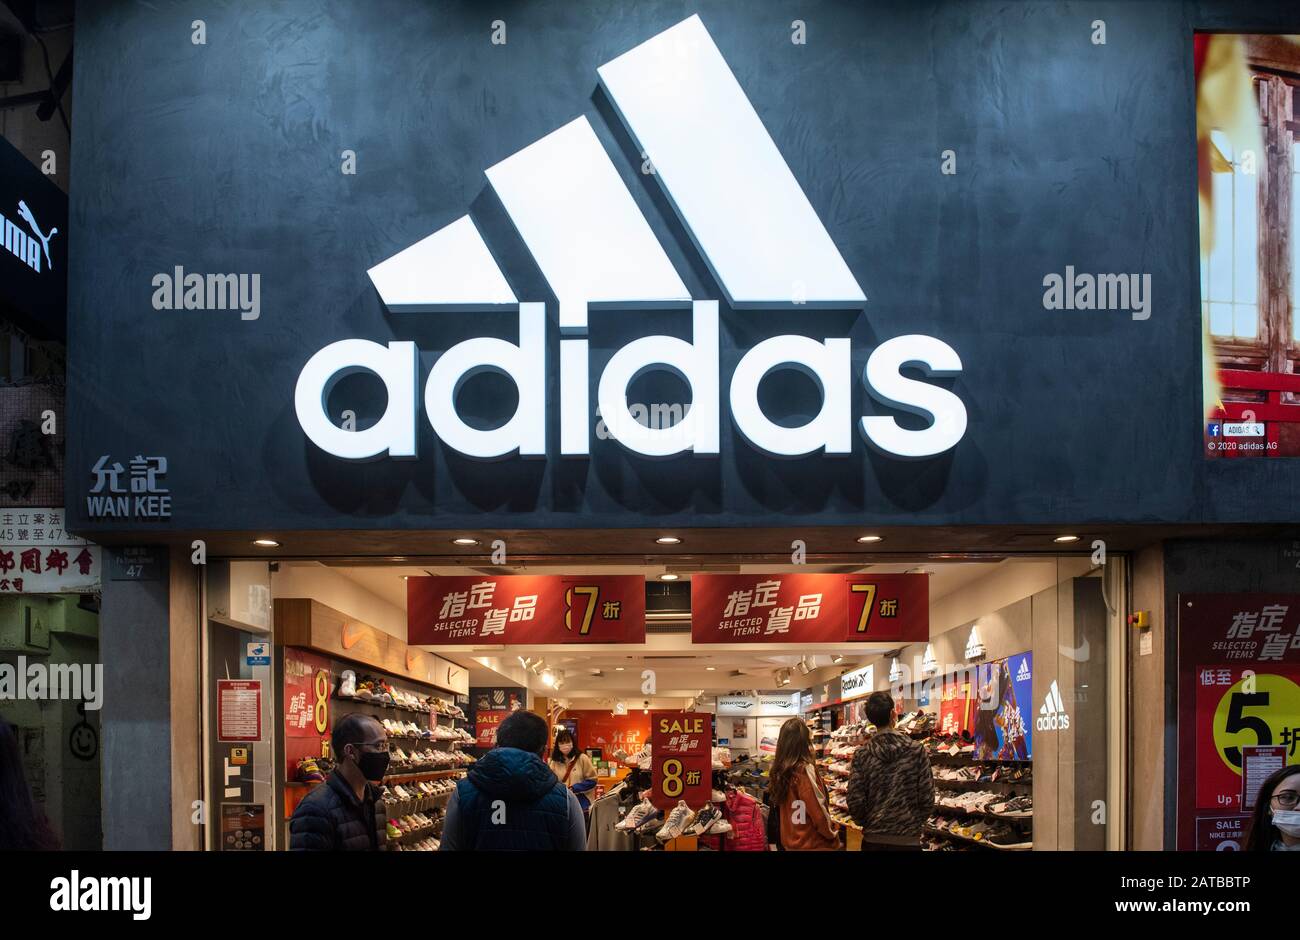 Stores That Sell Adidas Clothing Top Sellers, 58%.